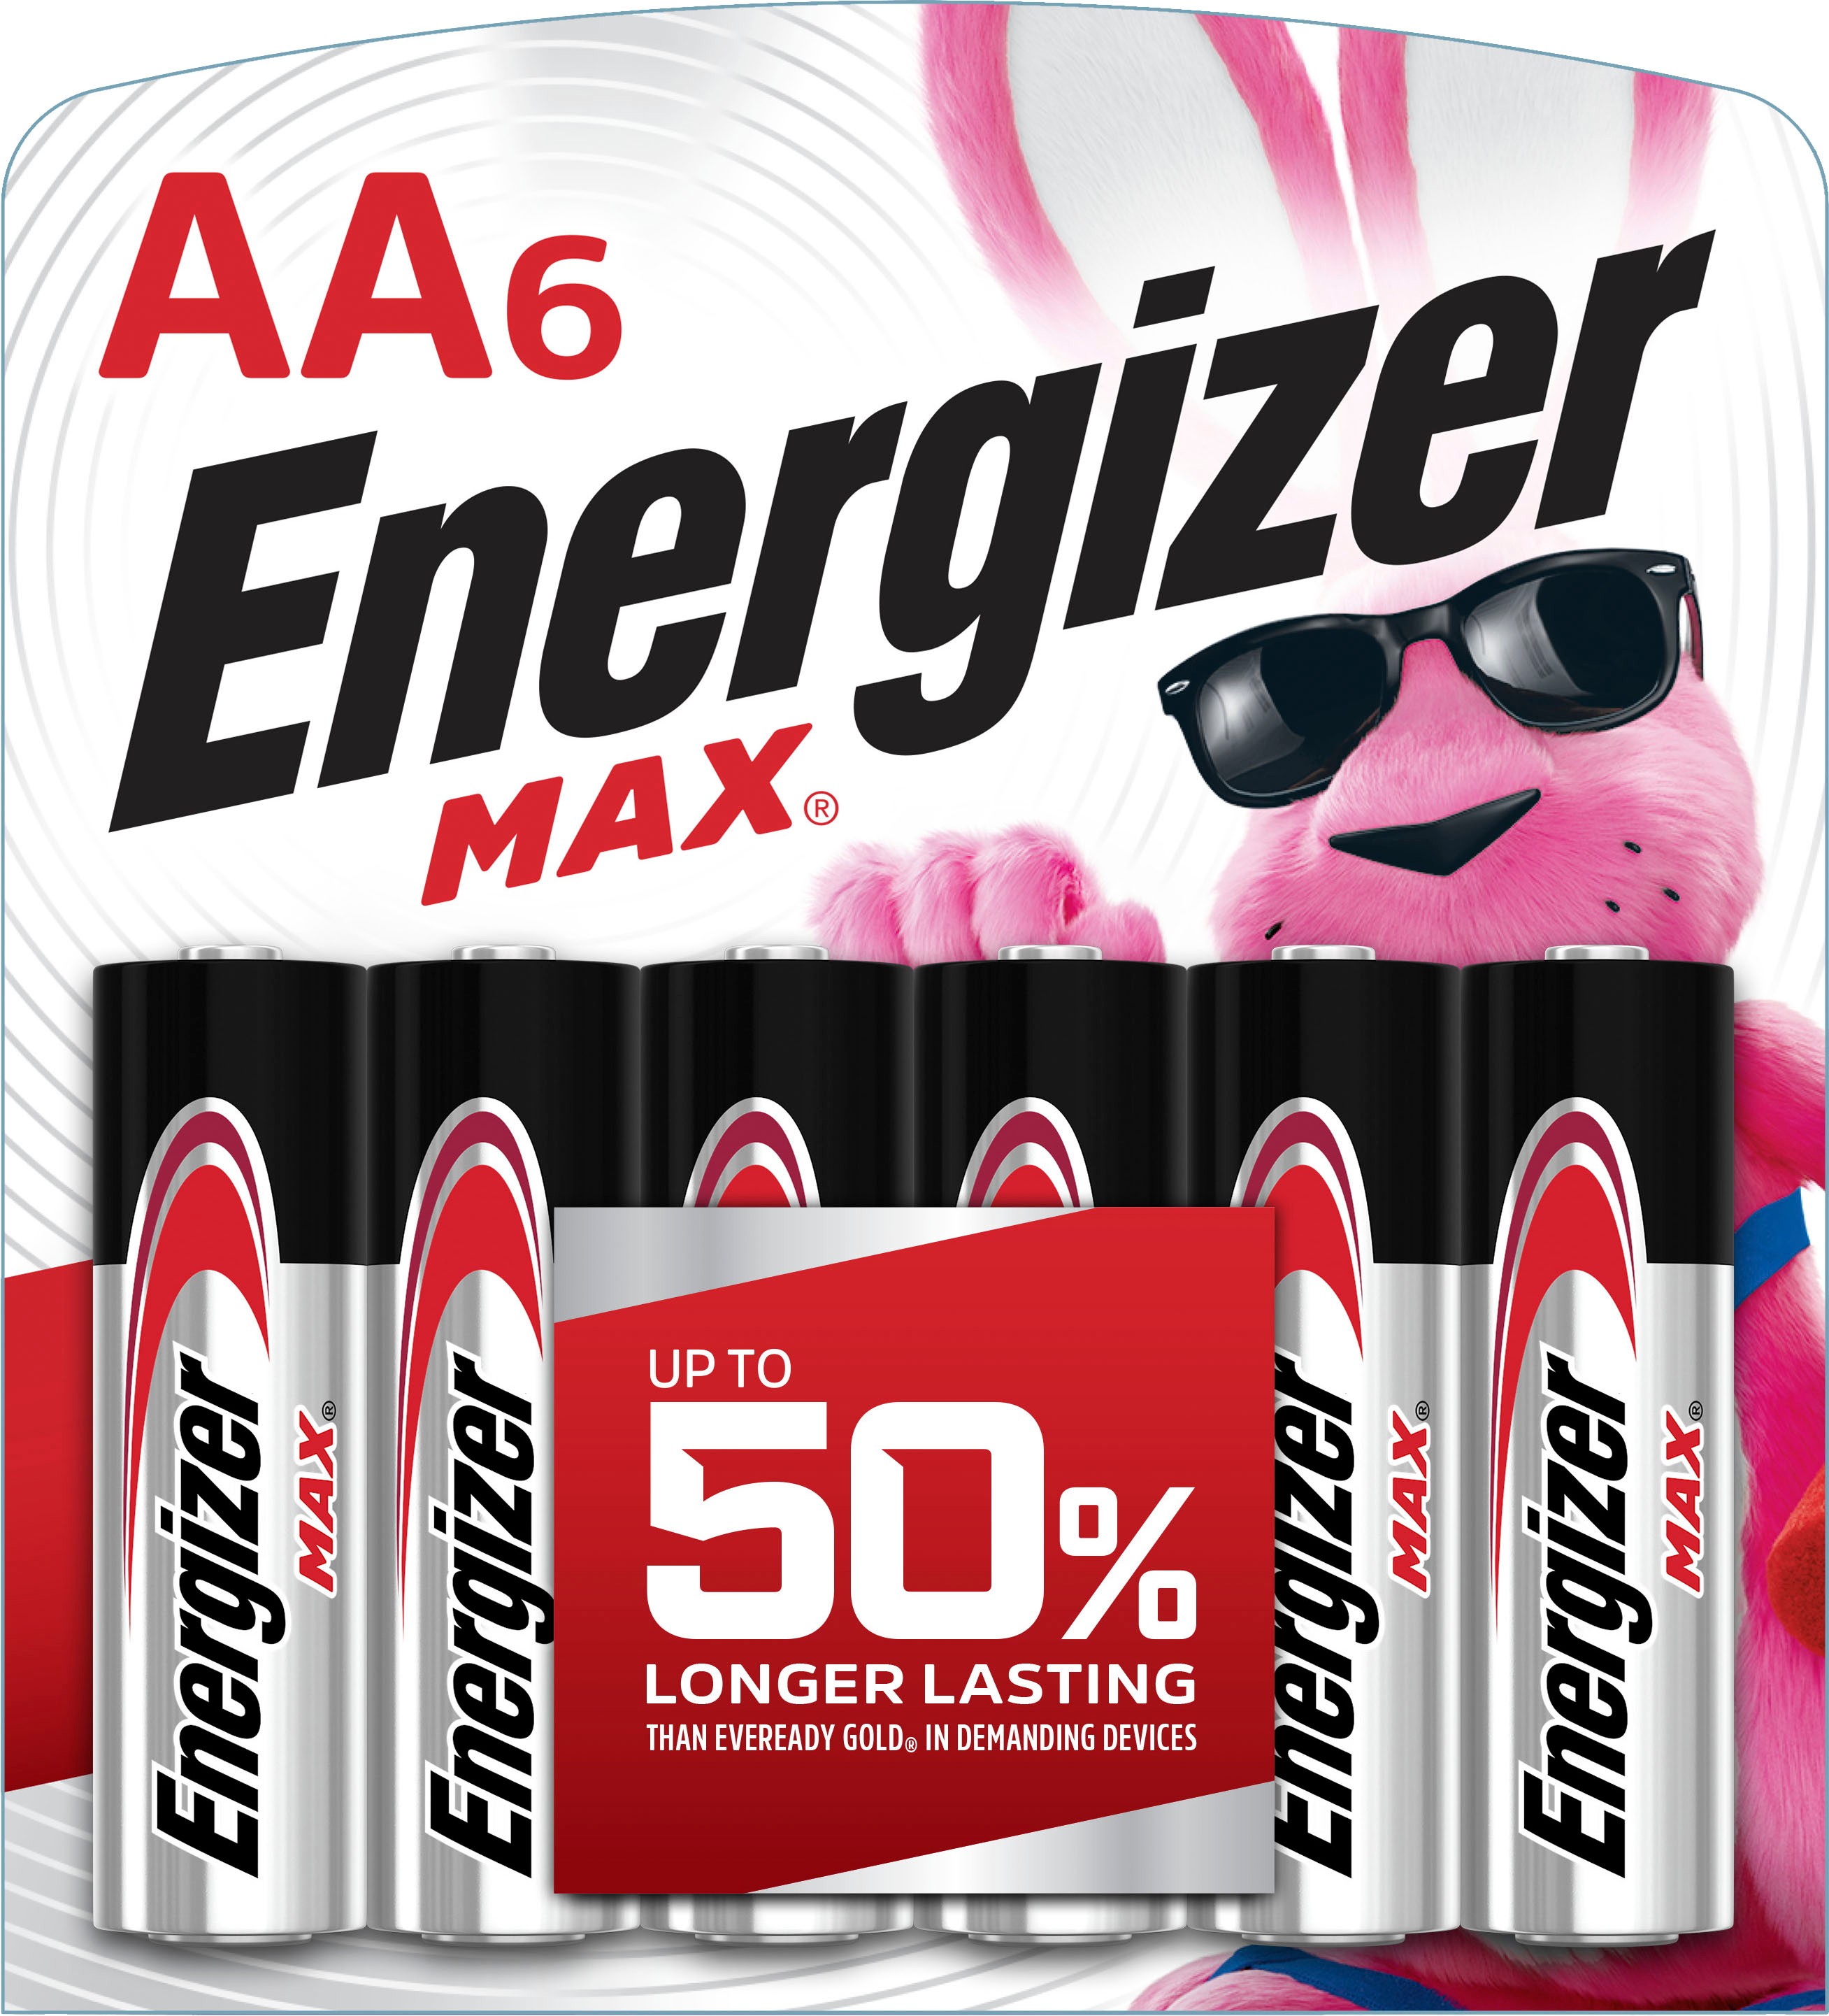 6 Energizer Ultimate Lithium AA Batteries